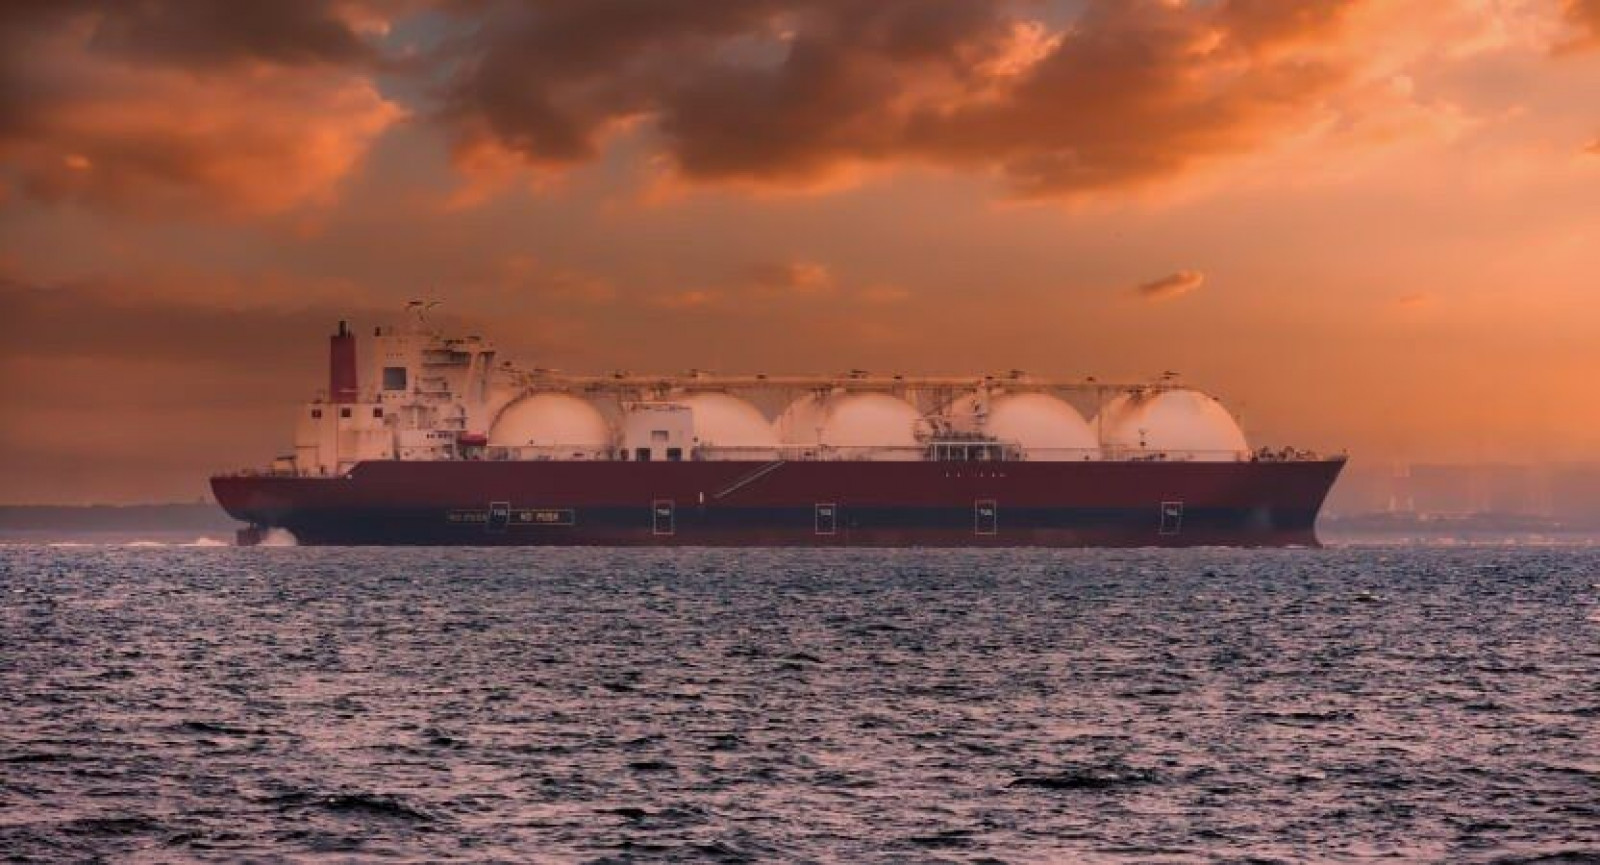 LNG and gas prices